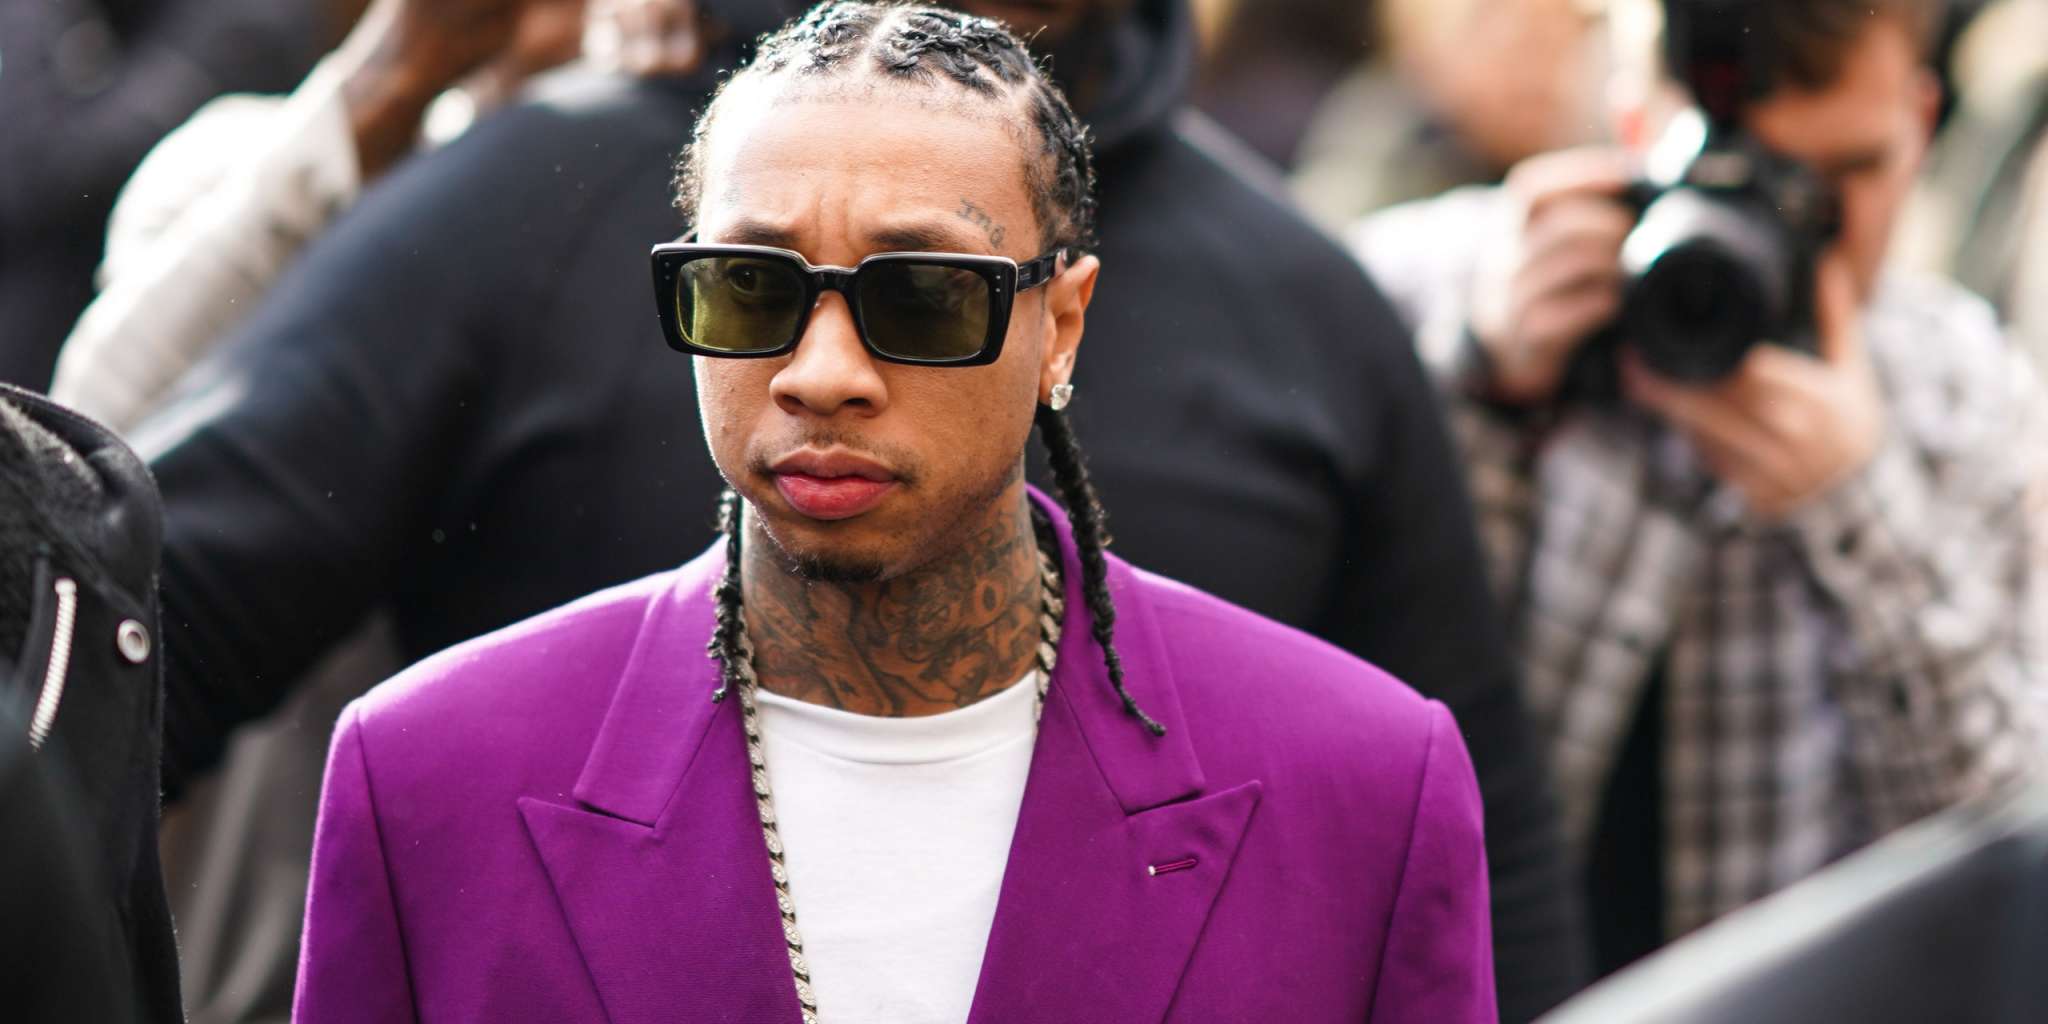 ”tyga-surrendered-to-the-police-following-alleged-assault-his-ex-gf-is-involved”